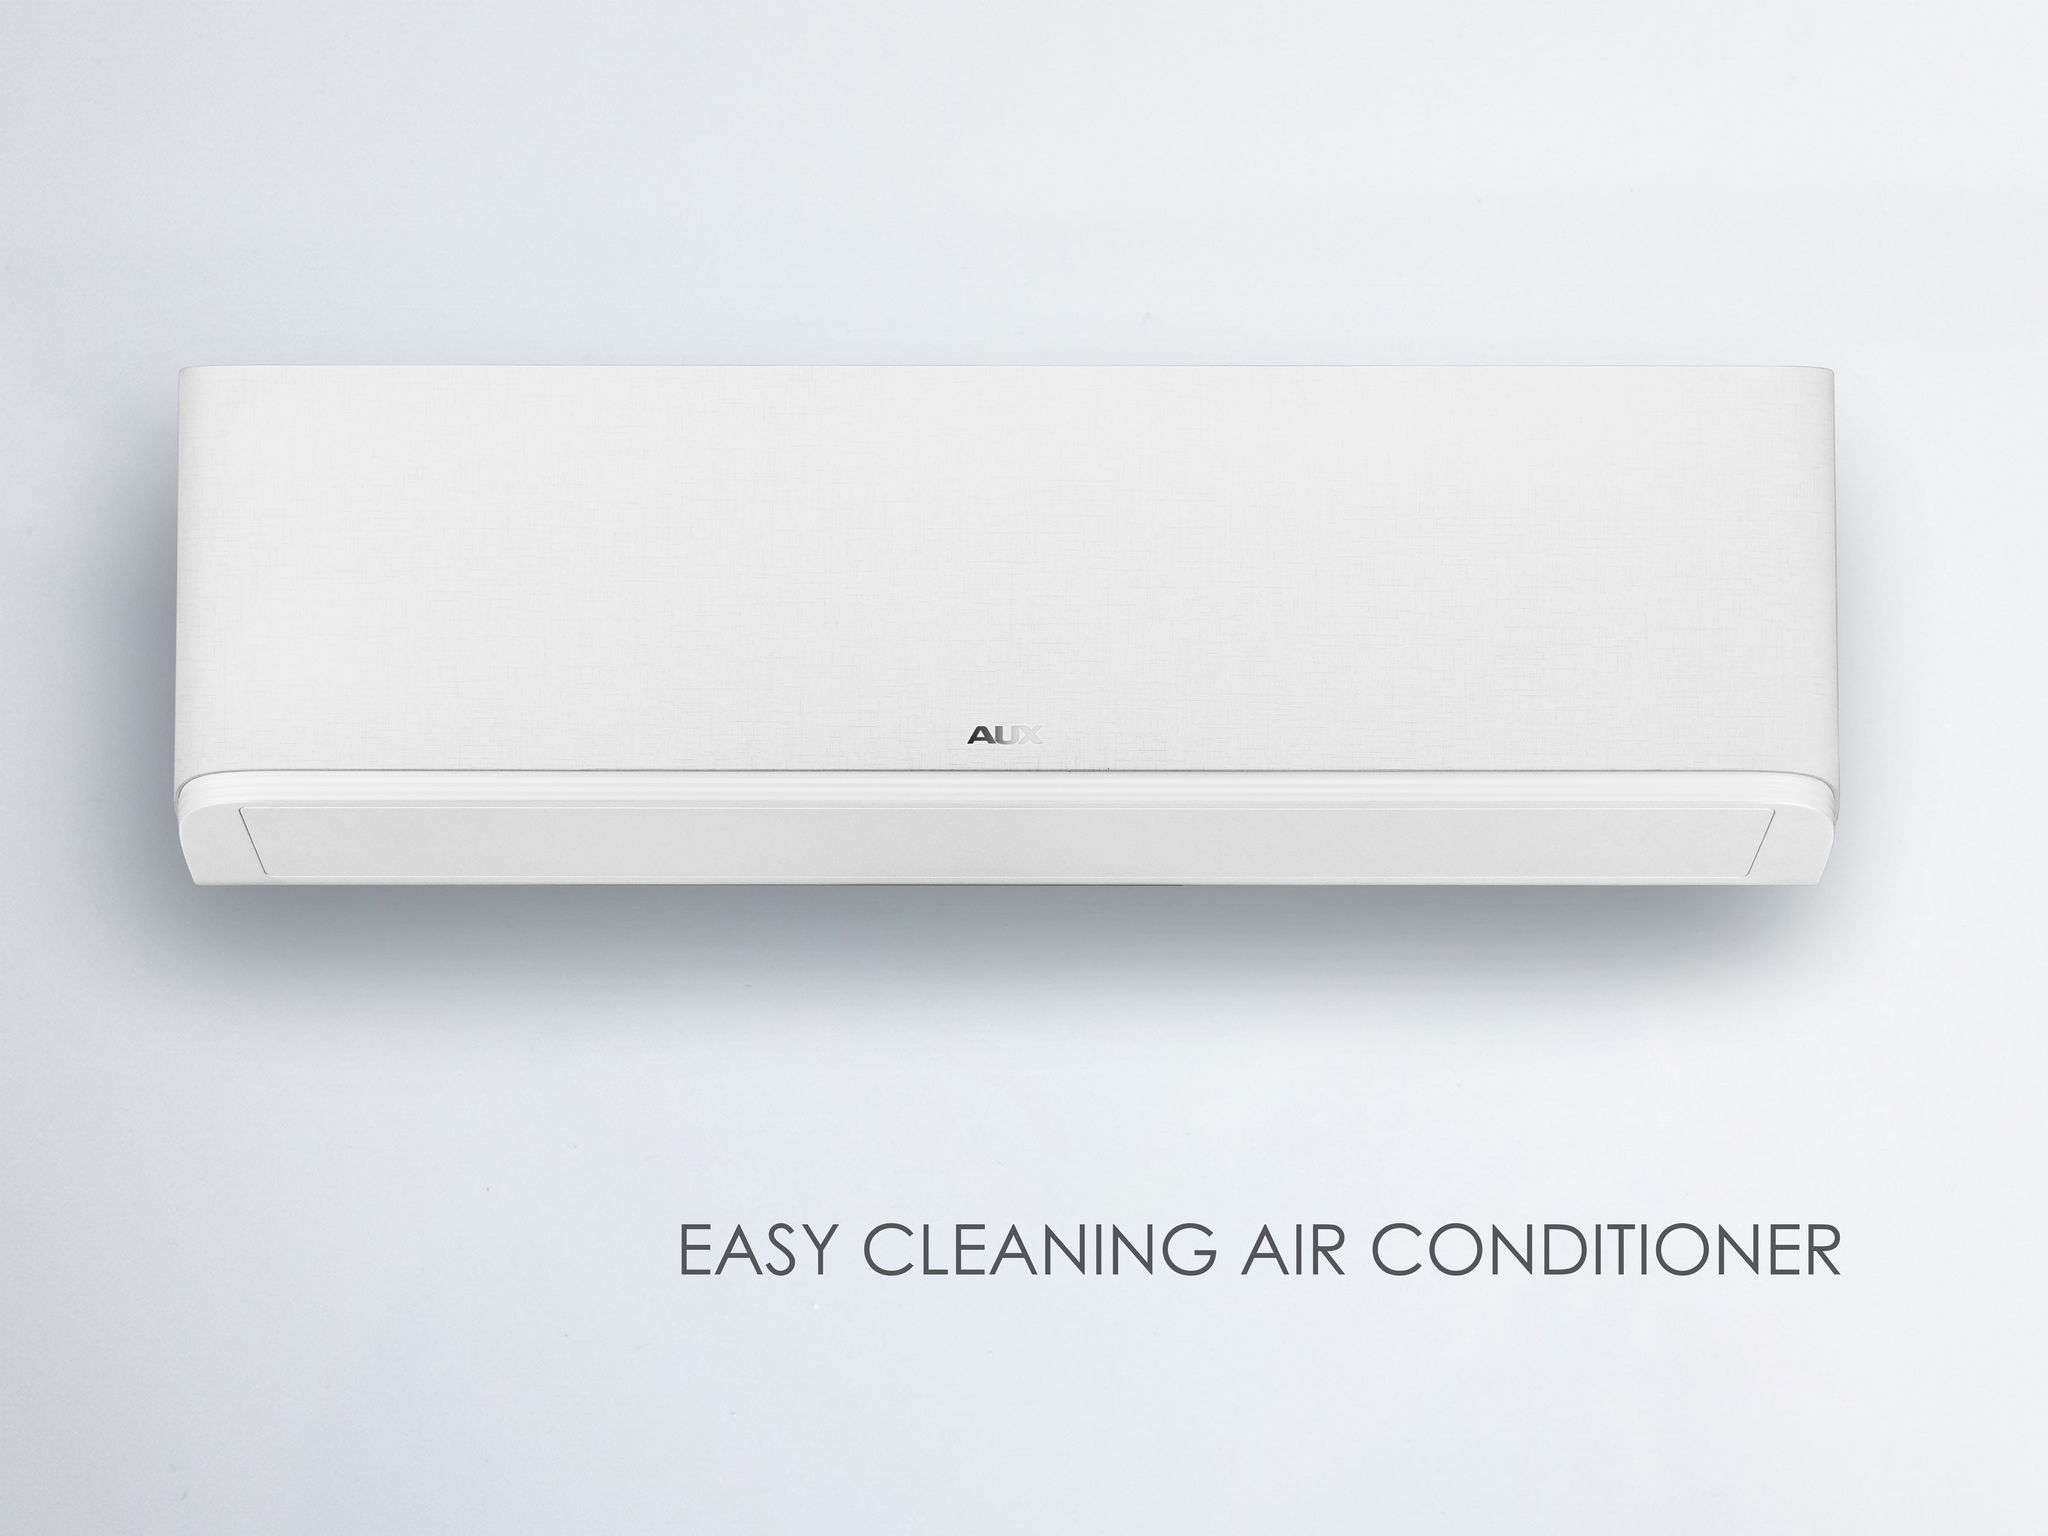 Easy cleaning air conditioner